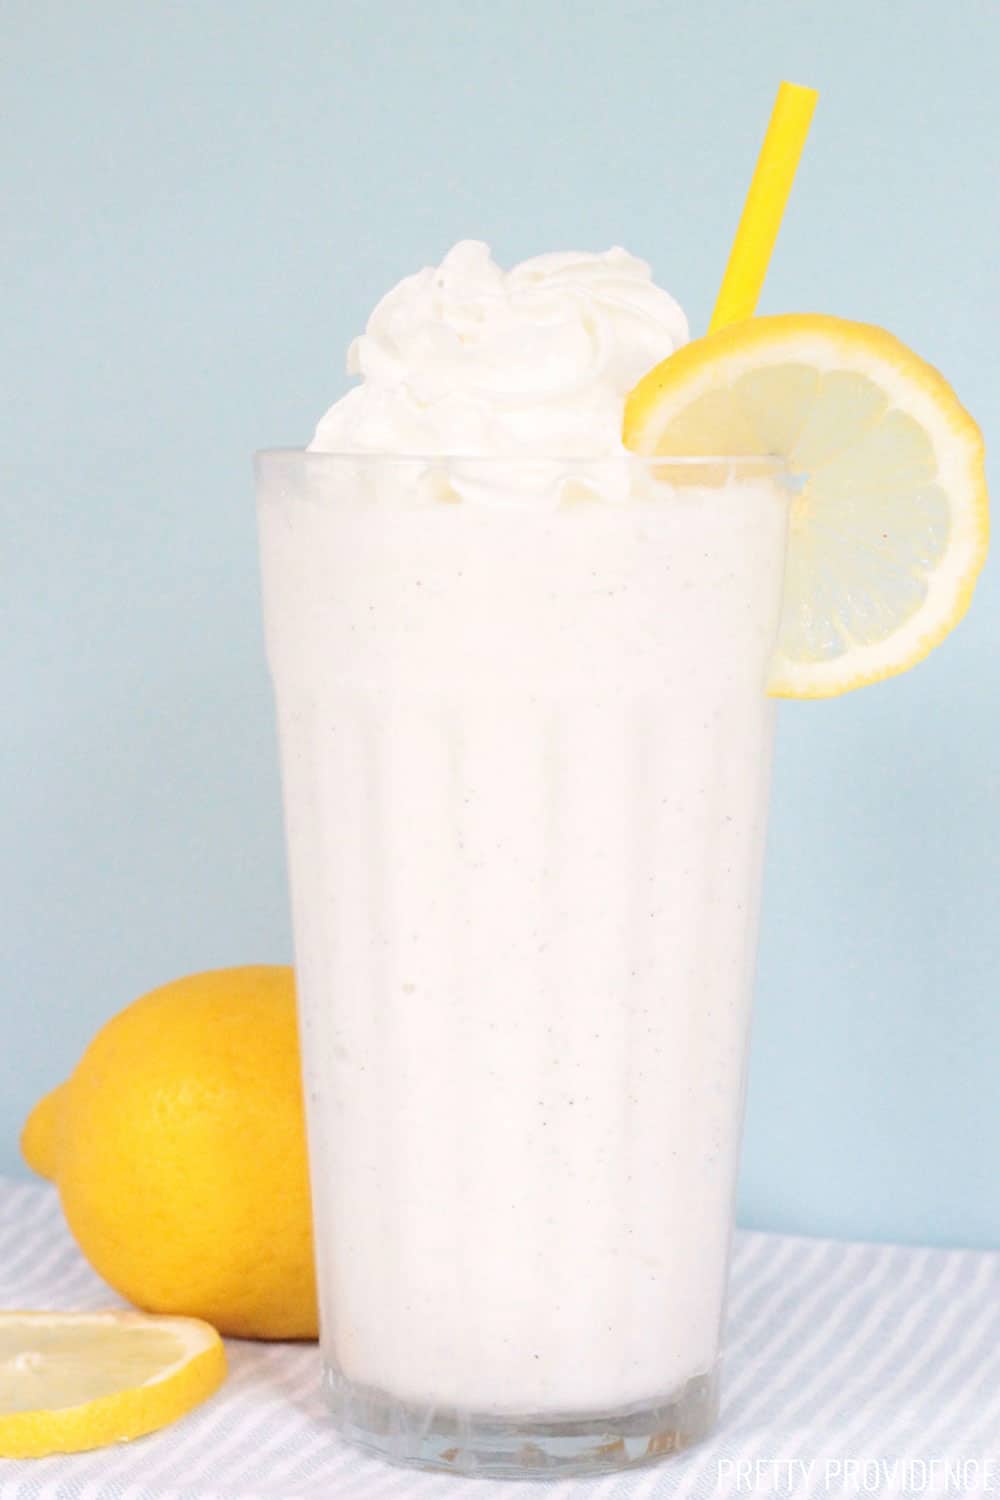 Frosted Lemonade in a tall glass with a yellow straw, topped with whipped cream and a lemon slice.